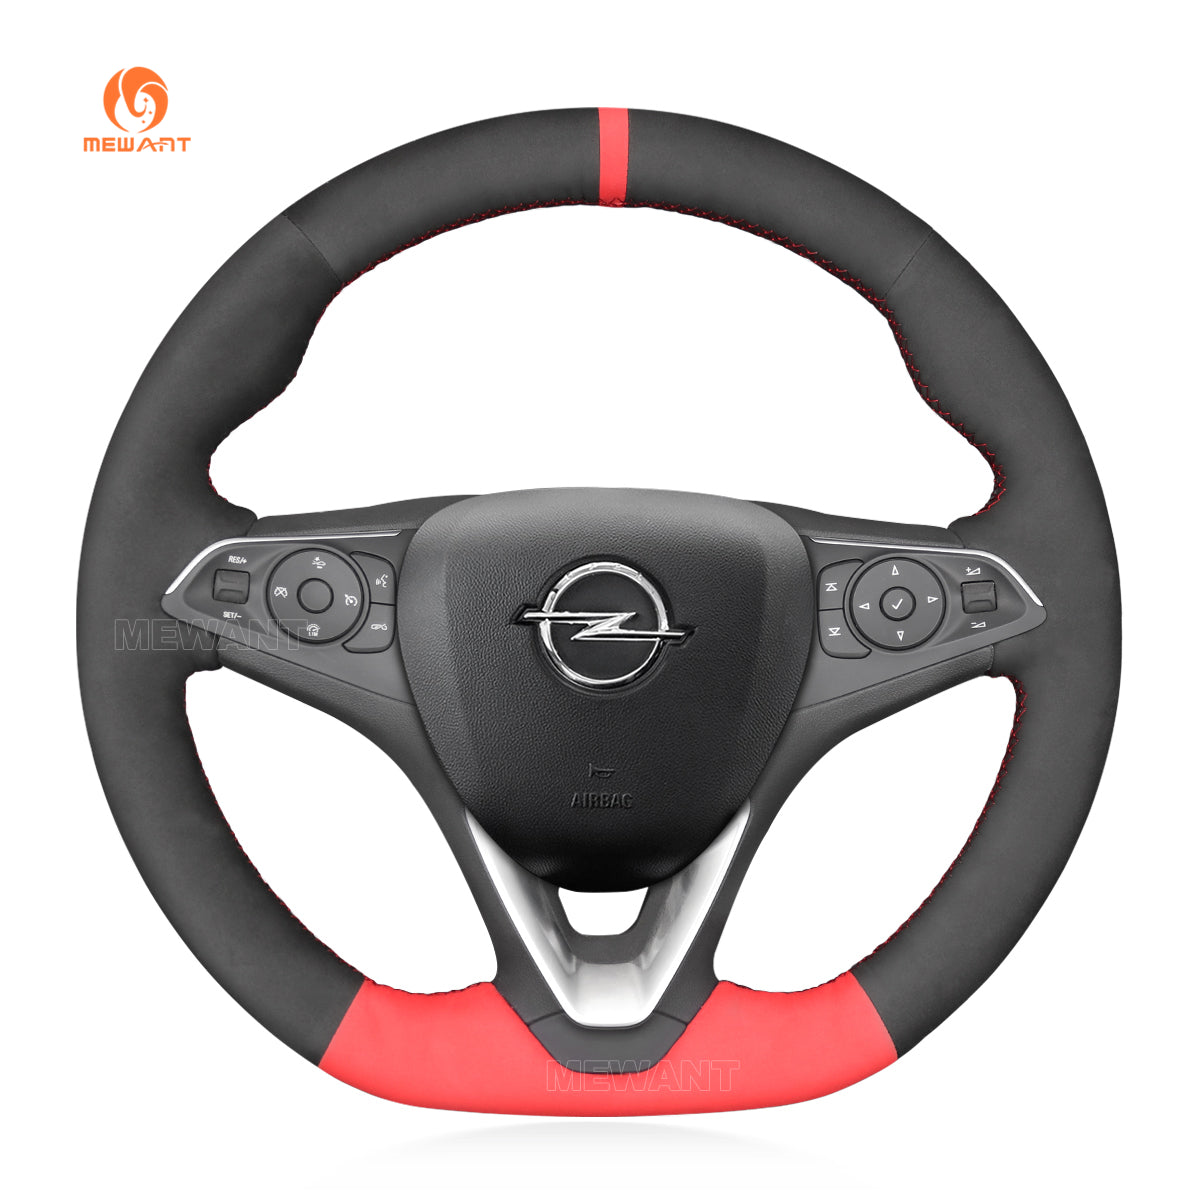 MEWANT Car Steering Wheel Cover for Opel Astra K Corsa F / VauxhallAst –  Mewant steering wheel cover